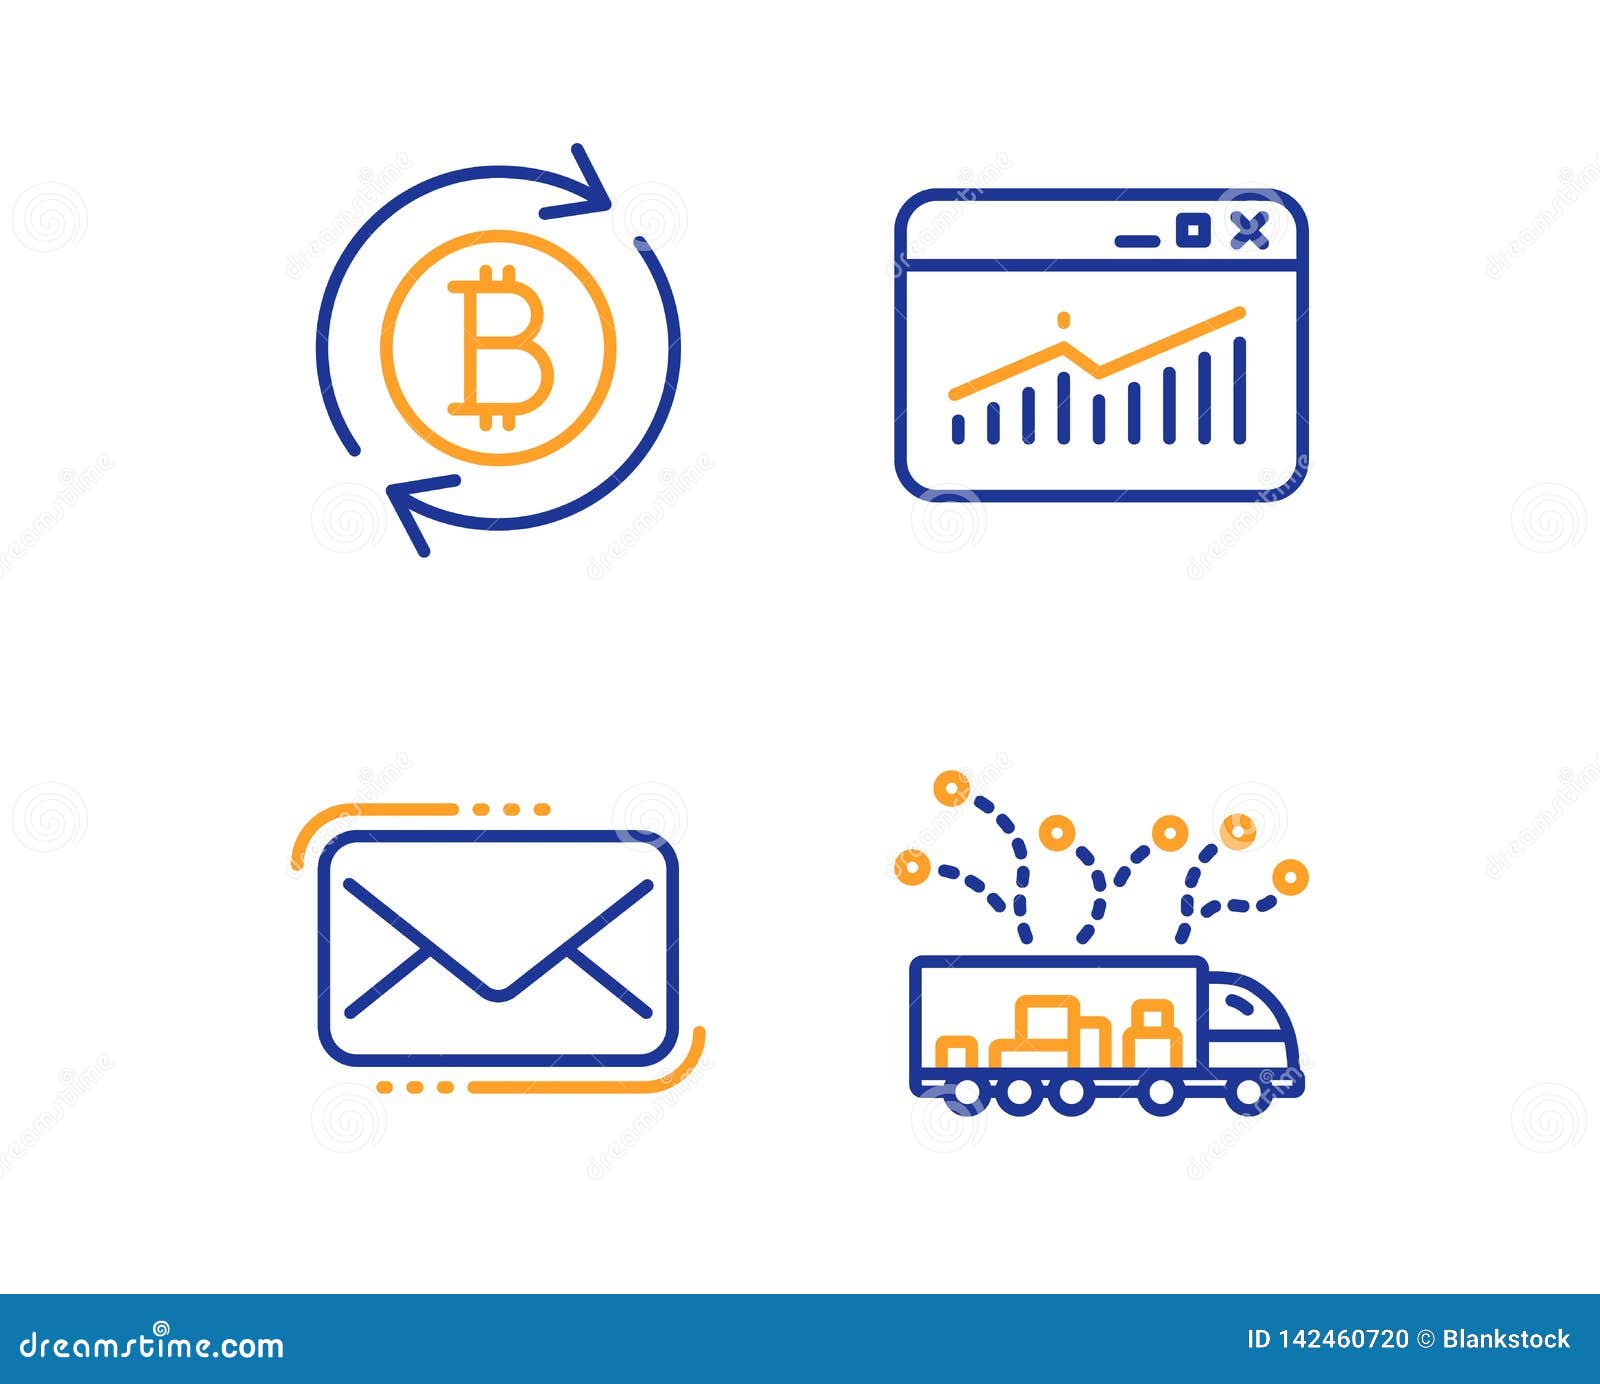 Messenger Mail Website Statistics And Refresh Bitcoin Icons Set - 